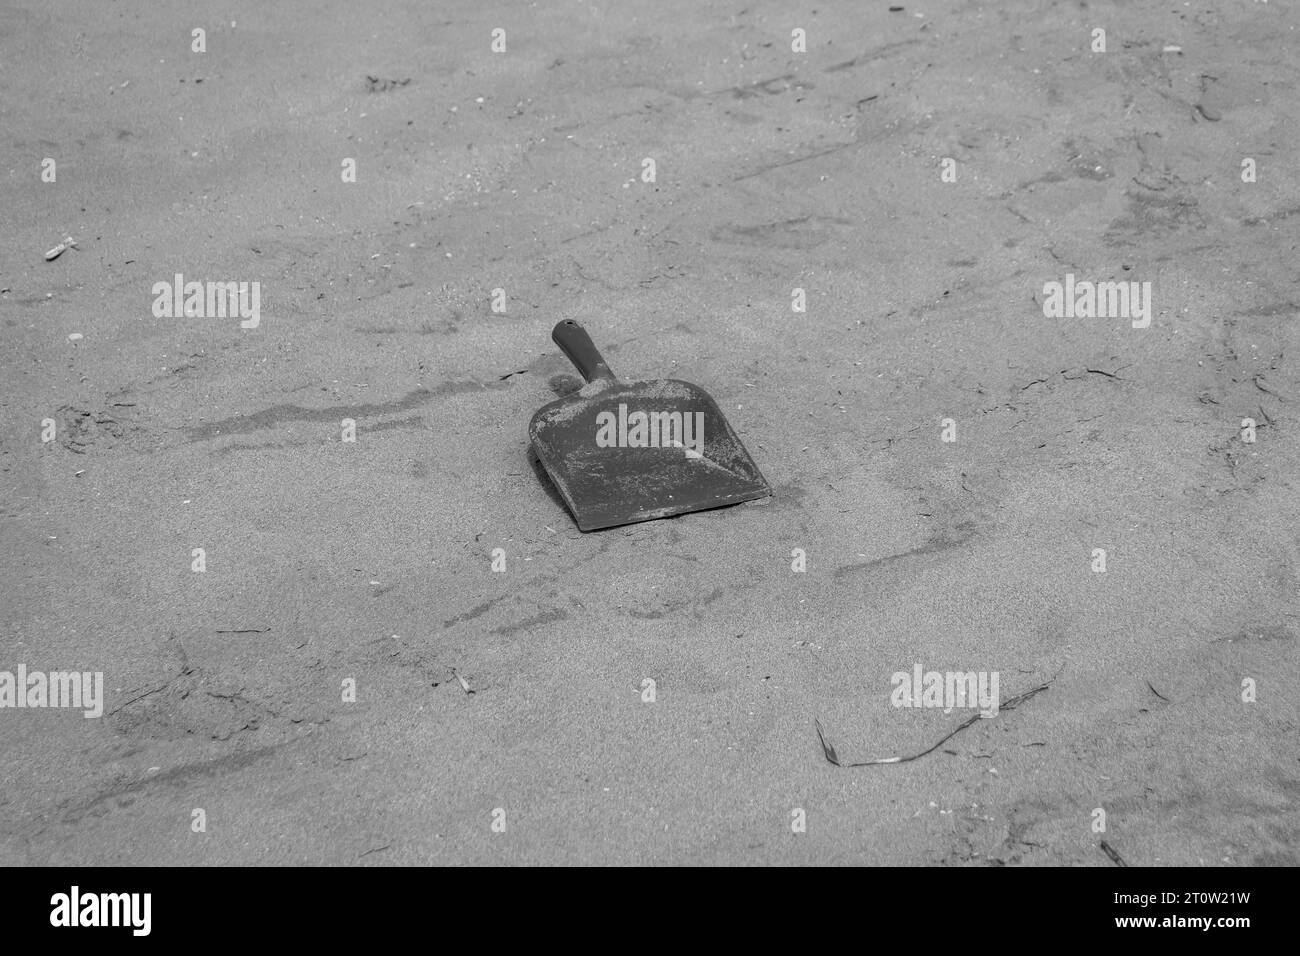 dustpan cleaning product on beach sand creating dirt, trash and pollution near the ocean. World environment day, ecological, pollution concept Stock Photo